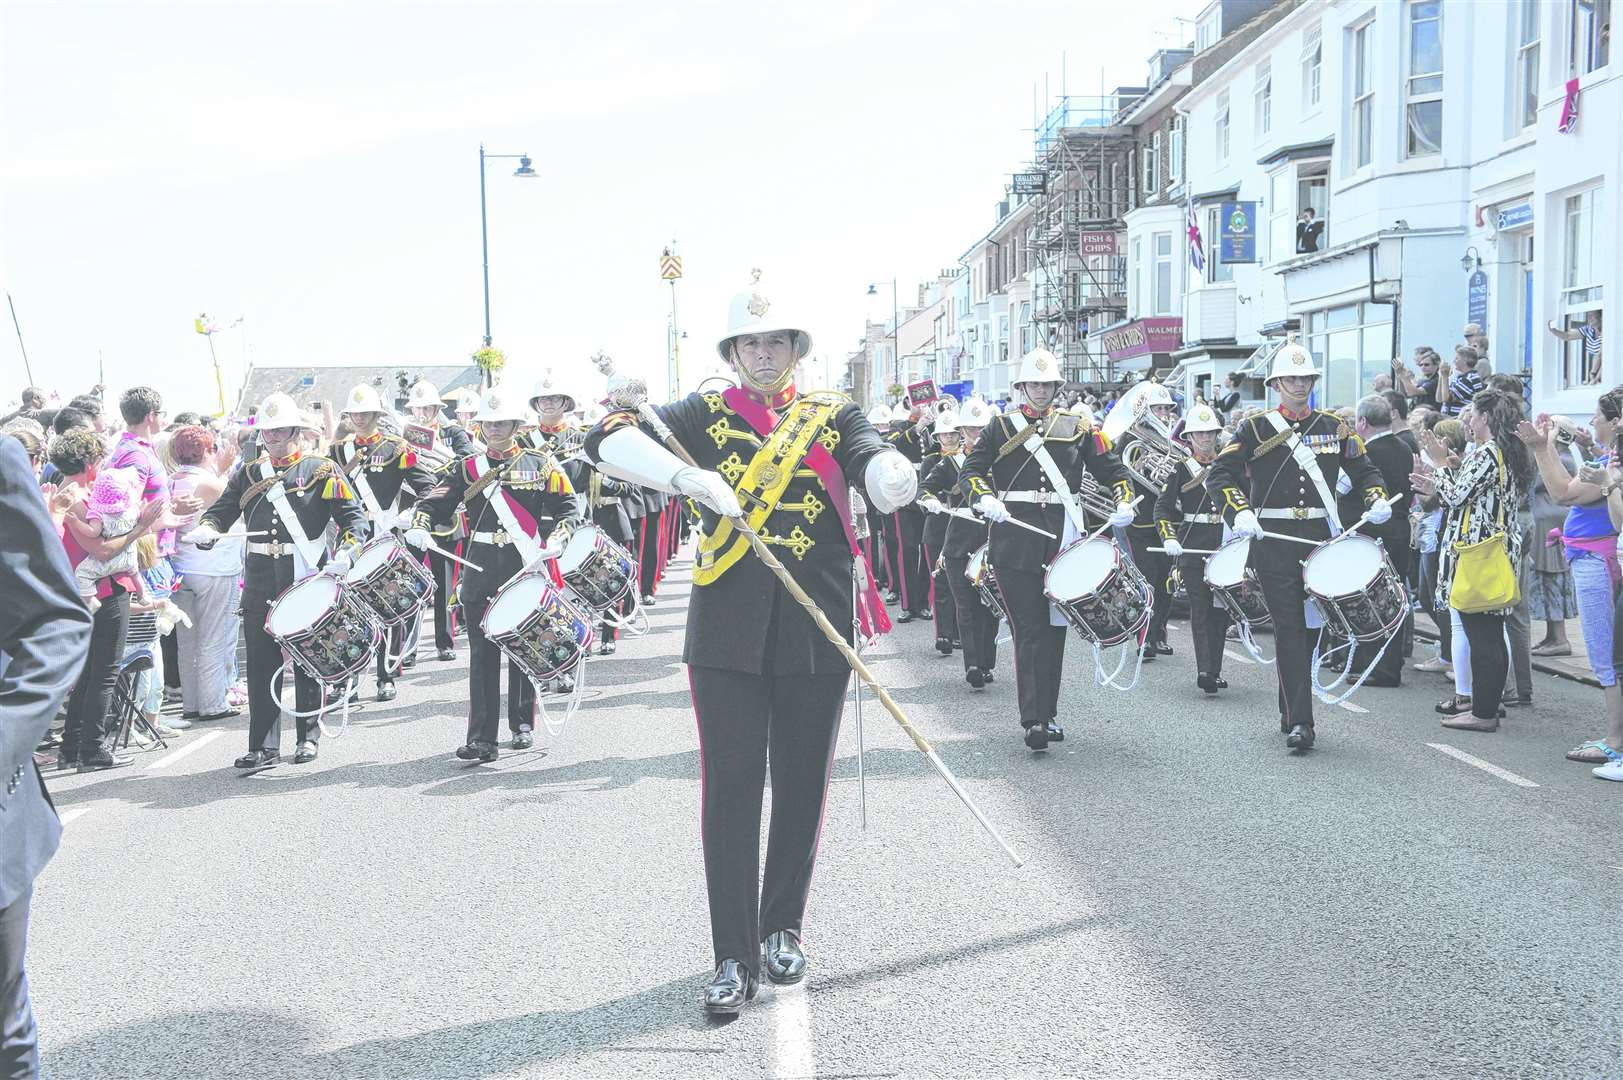 The marching band happens on special anniversaries. Picture: Tony Flashman